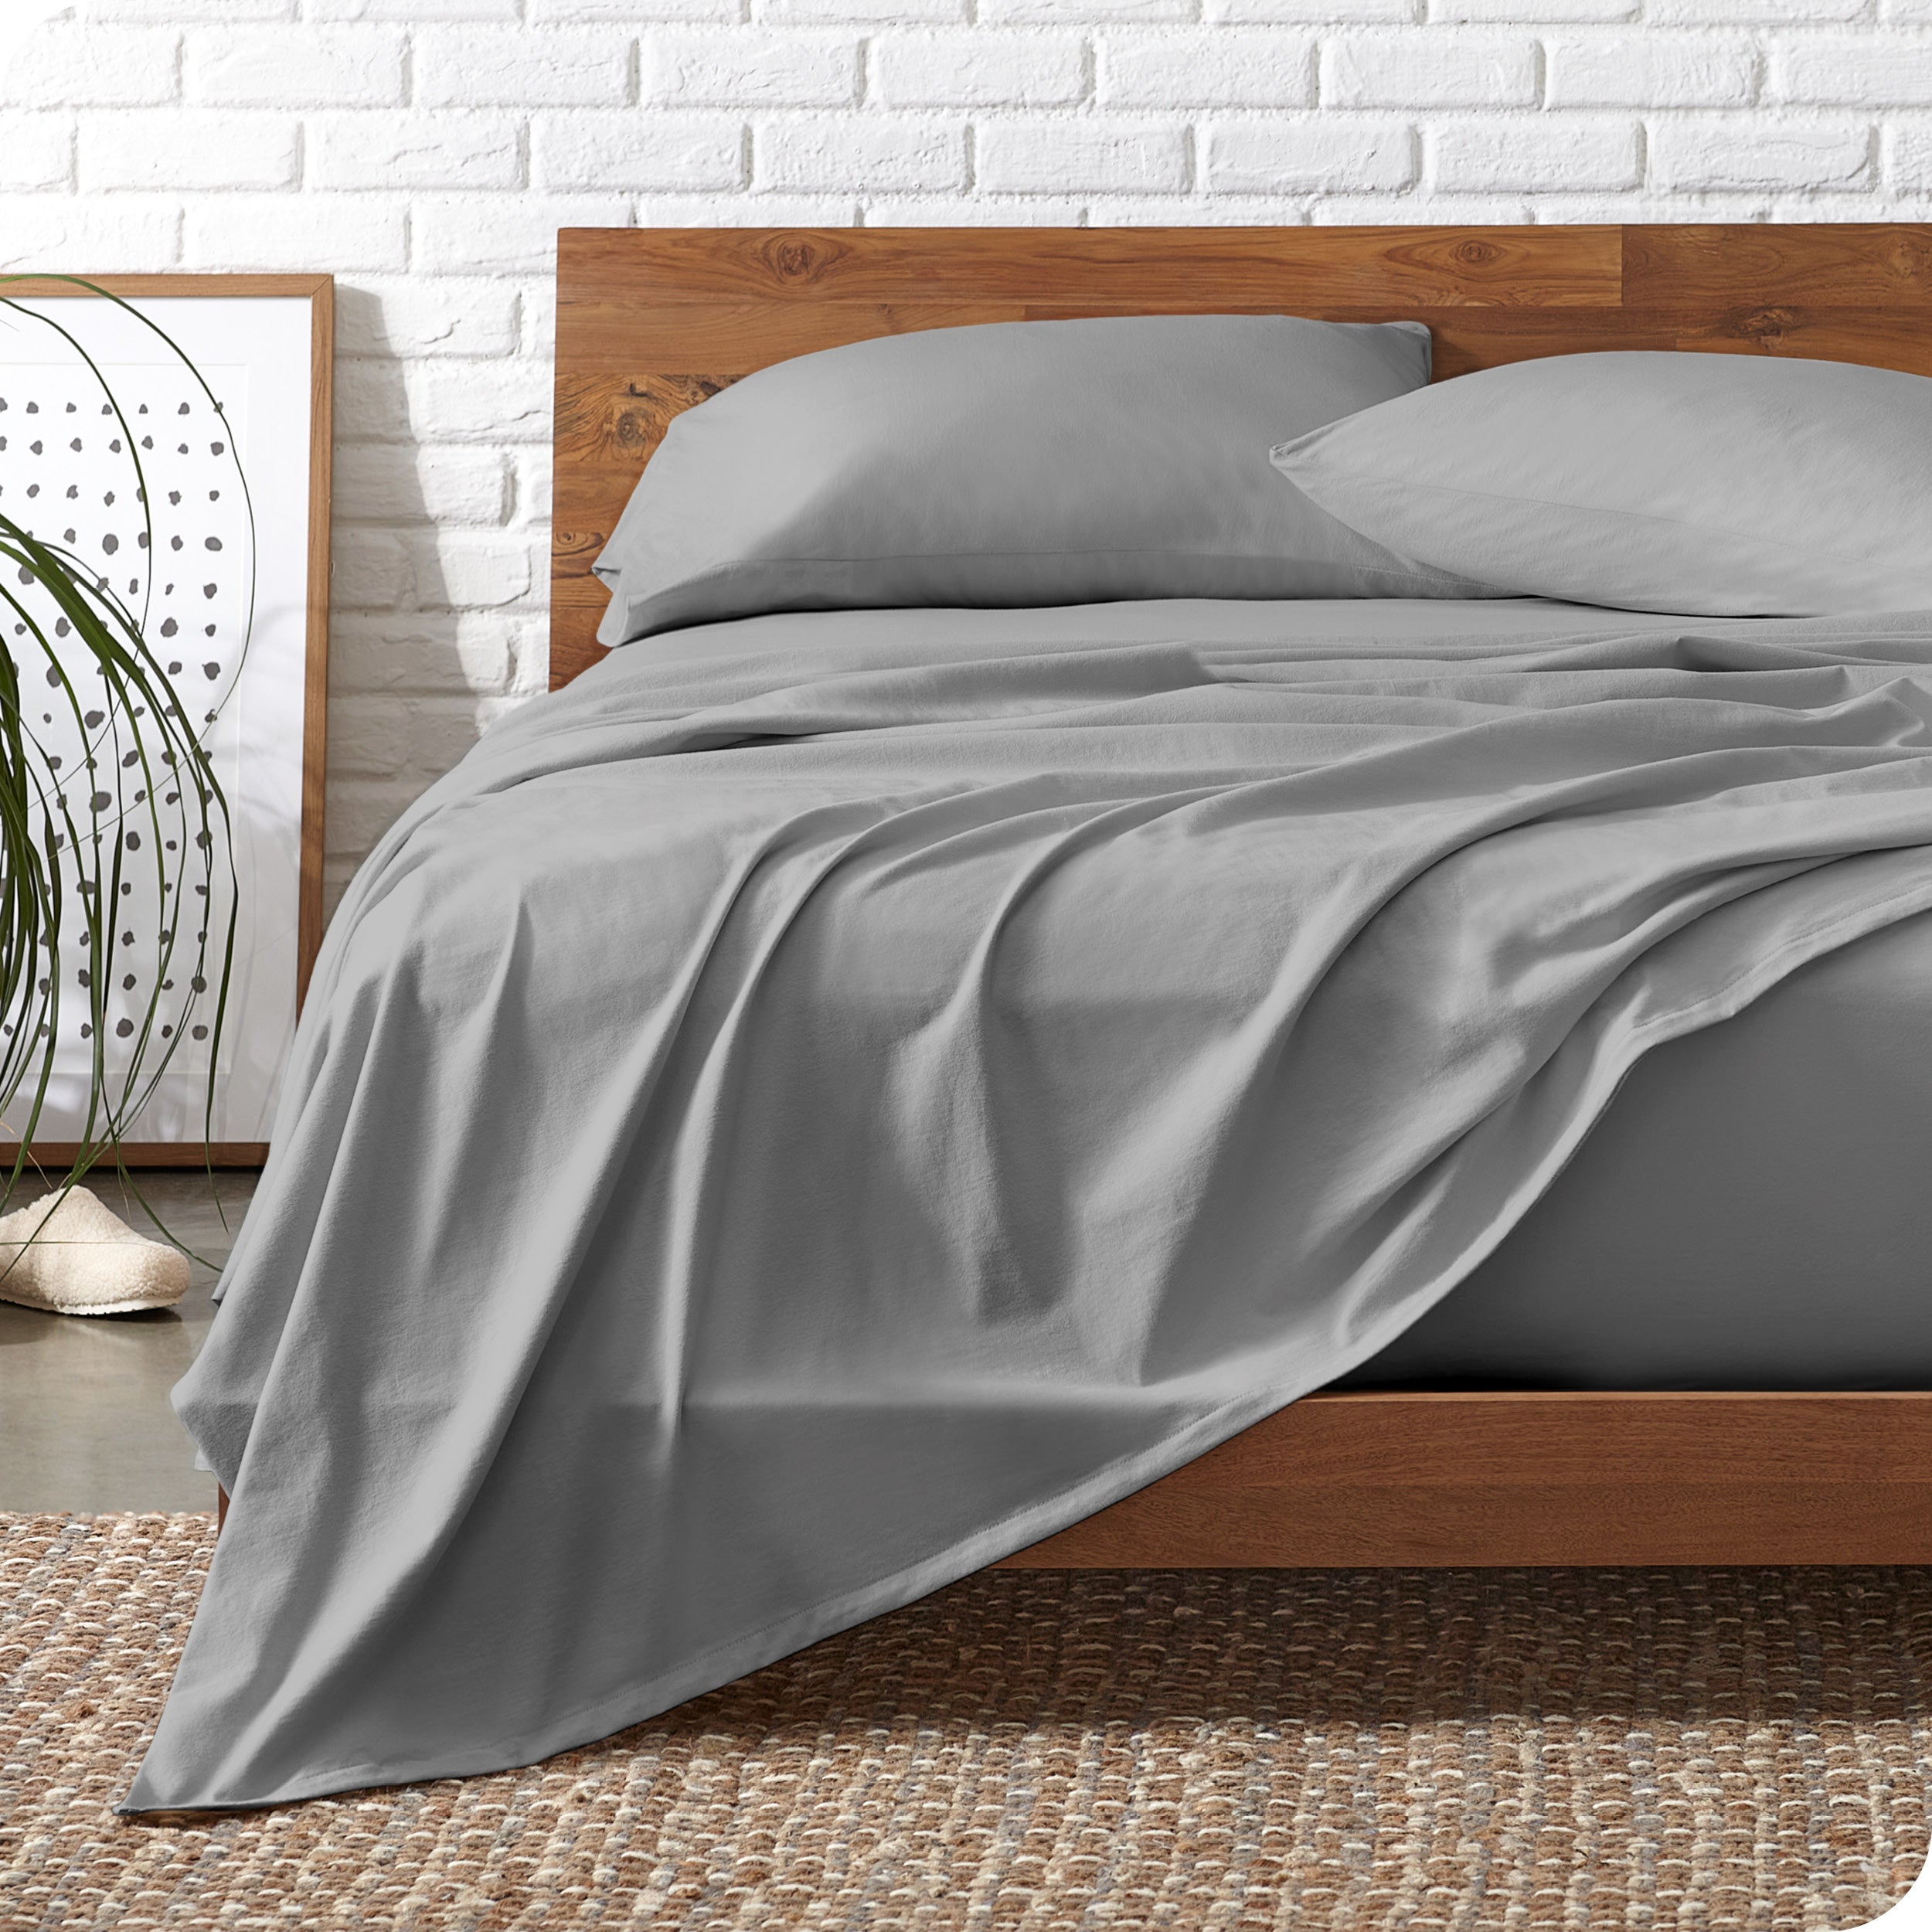 Wooden bed frame with light grey organic cotton jersey sheets on the bed